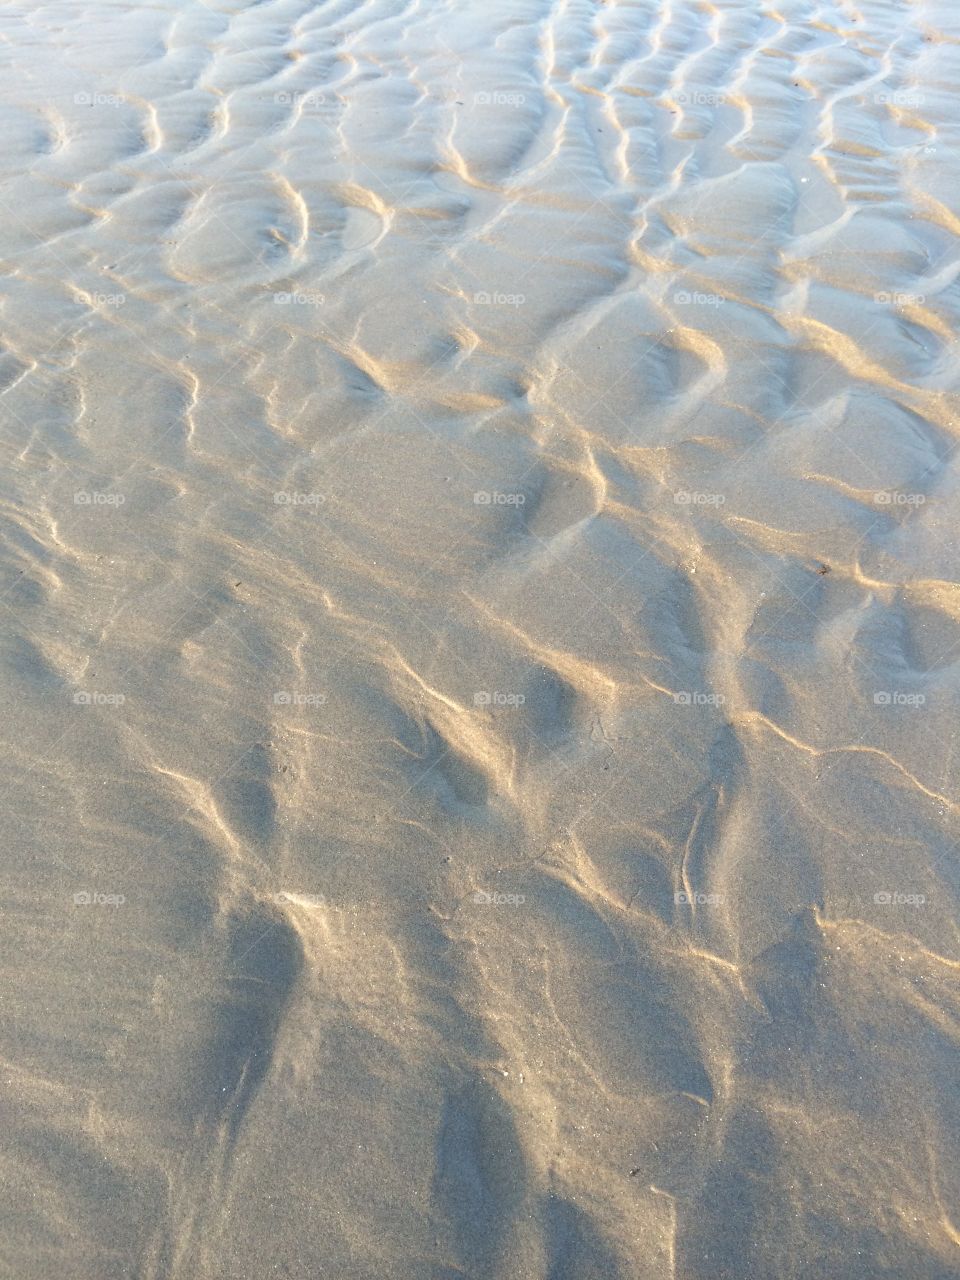 Ridge surface of the seabed at low tide.